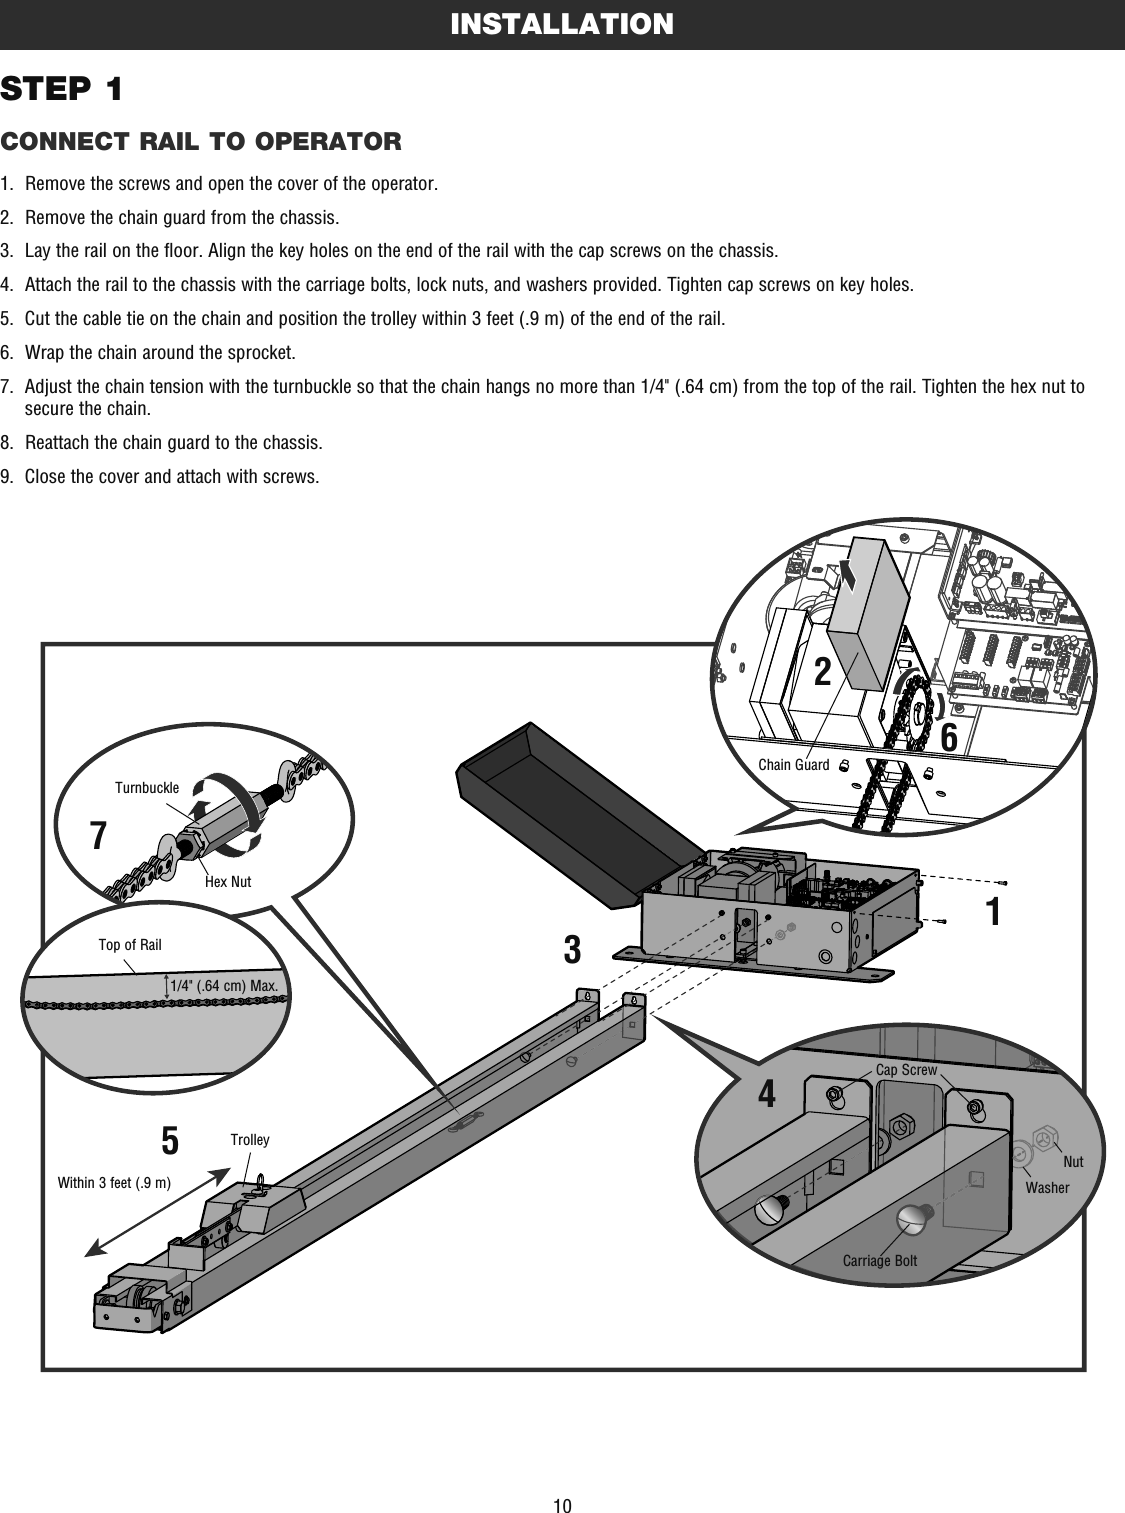 10STEP 1CONNECT RAIL TO OPERATORINSTALLATION1.  Remove the screws and open the cover of the operator. 2.  Remove the chain guard from the chassis.3.  Lay the rail on the floor. Align the key holes on the end of the rail with the cap screws on the chassis.4.  Attach the rail to the chassis with the carriage bolts, lock nuts, and washers provided. Tighten cap screws on key holes.5.  Cut the cable tie on the chain and position the trolley within 3 feet (.9 m) of the end of the rail.6.  Wrap the chain around the sprocket.7.   Adjust the chain tension with the turnbuckle so that the chain hangs no more than 1/4&quot; (.64 cm) from the top of the rail. Tighten the hex nut to secure the chain.8.  Reattach the chain guard to the chassis.9.   Close the cover and attach with screws.Within 3 feet (.9 m)Top of RailTrolley1/4&quot; (.64 cm) Max.Chain GuardHex NutTurnbuckleCarriage BoltCap ScrewNutWasher1234567